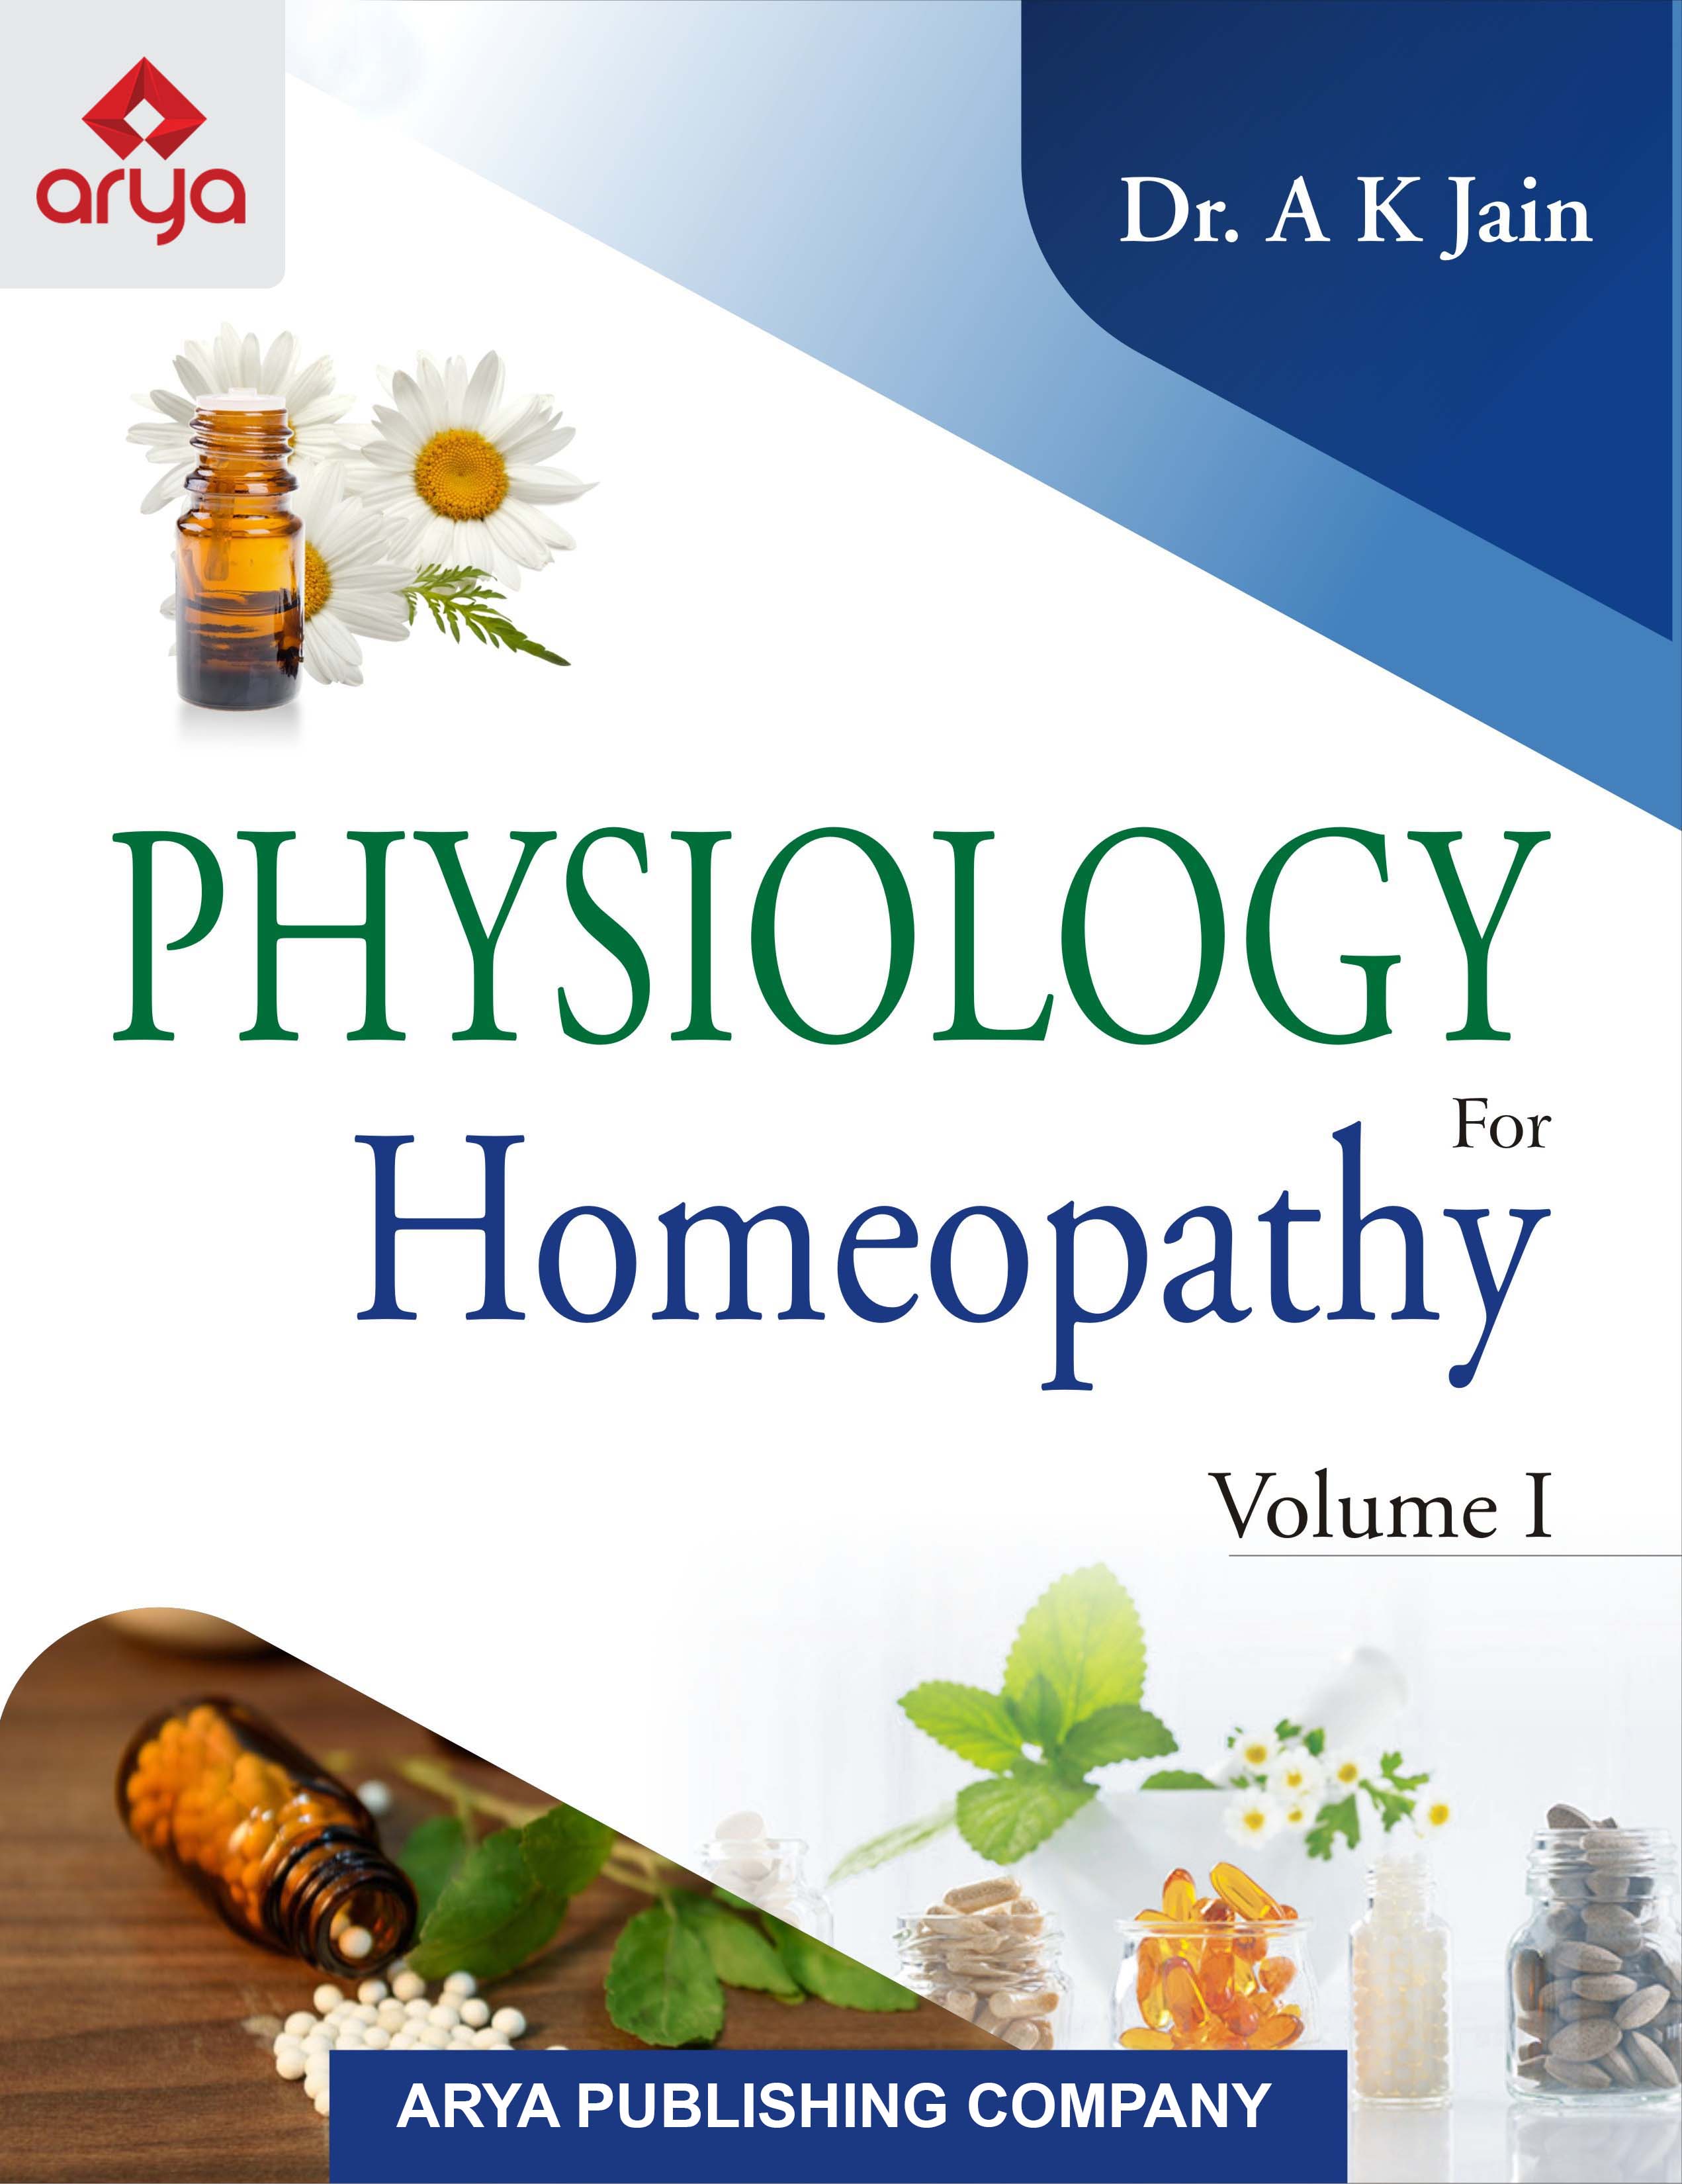 Physiology for Homeopathy (Volumes I and II)